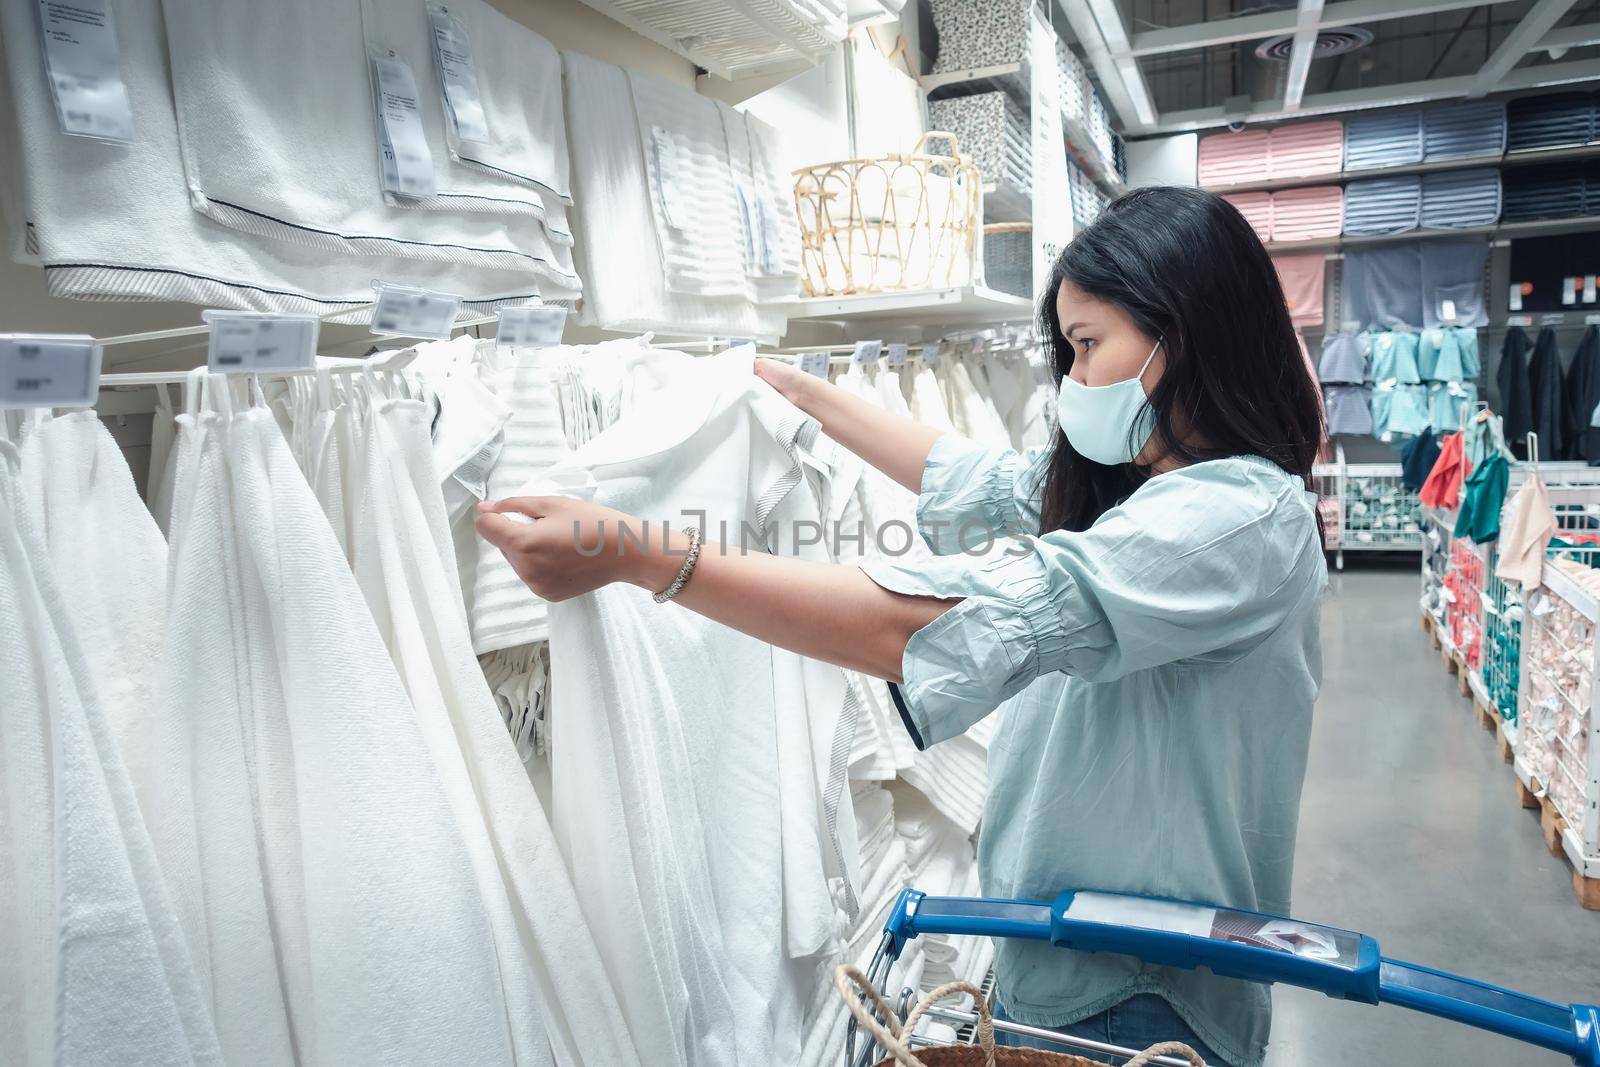 Customer Asian Woman Wearing Face Mask With Shopping Cart in Supermarket Department Store Shop While Choosing and Looking Towels on Shelf During Covid-19 Pandemic. Coronavirus Covid Crisis Situation